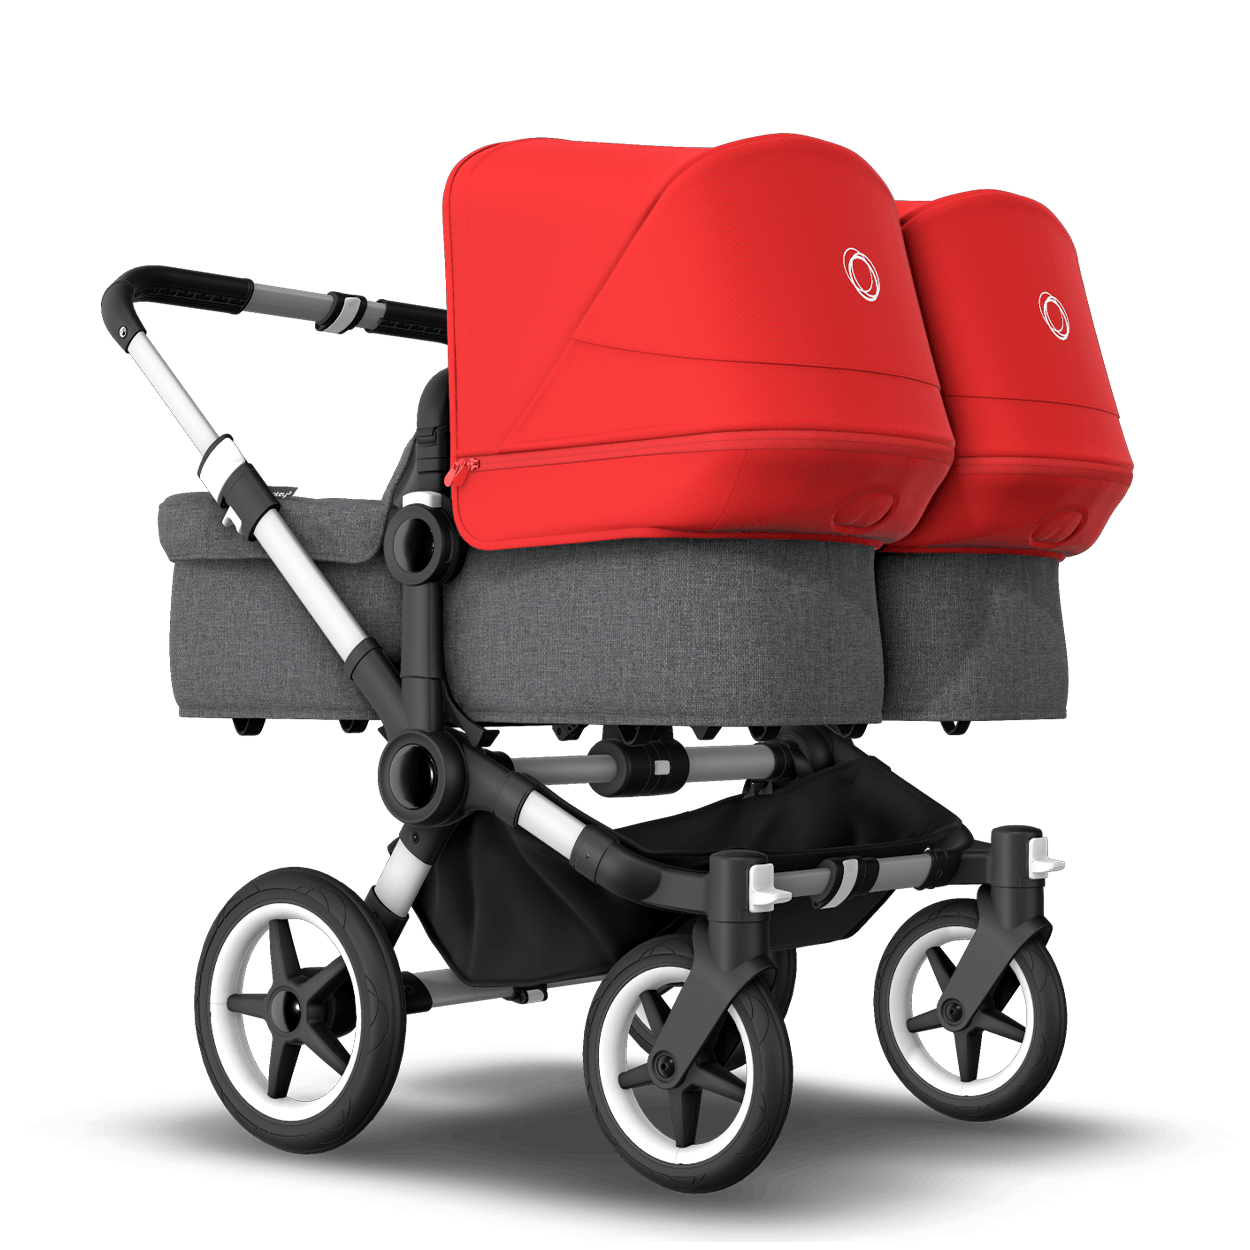 double pram systems